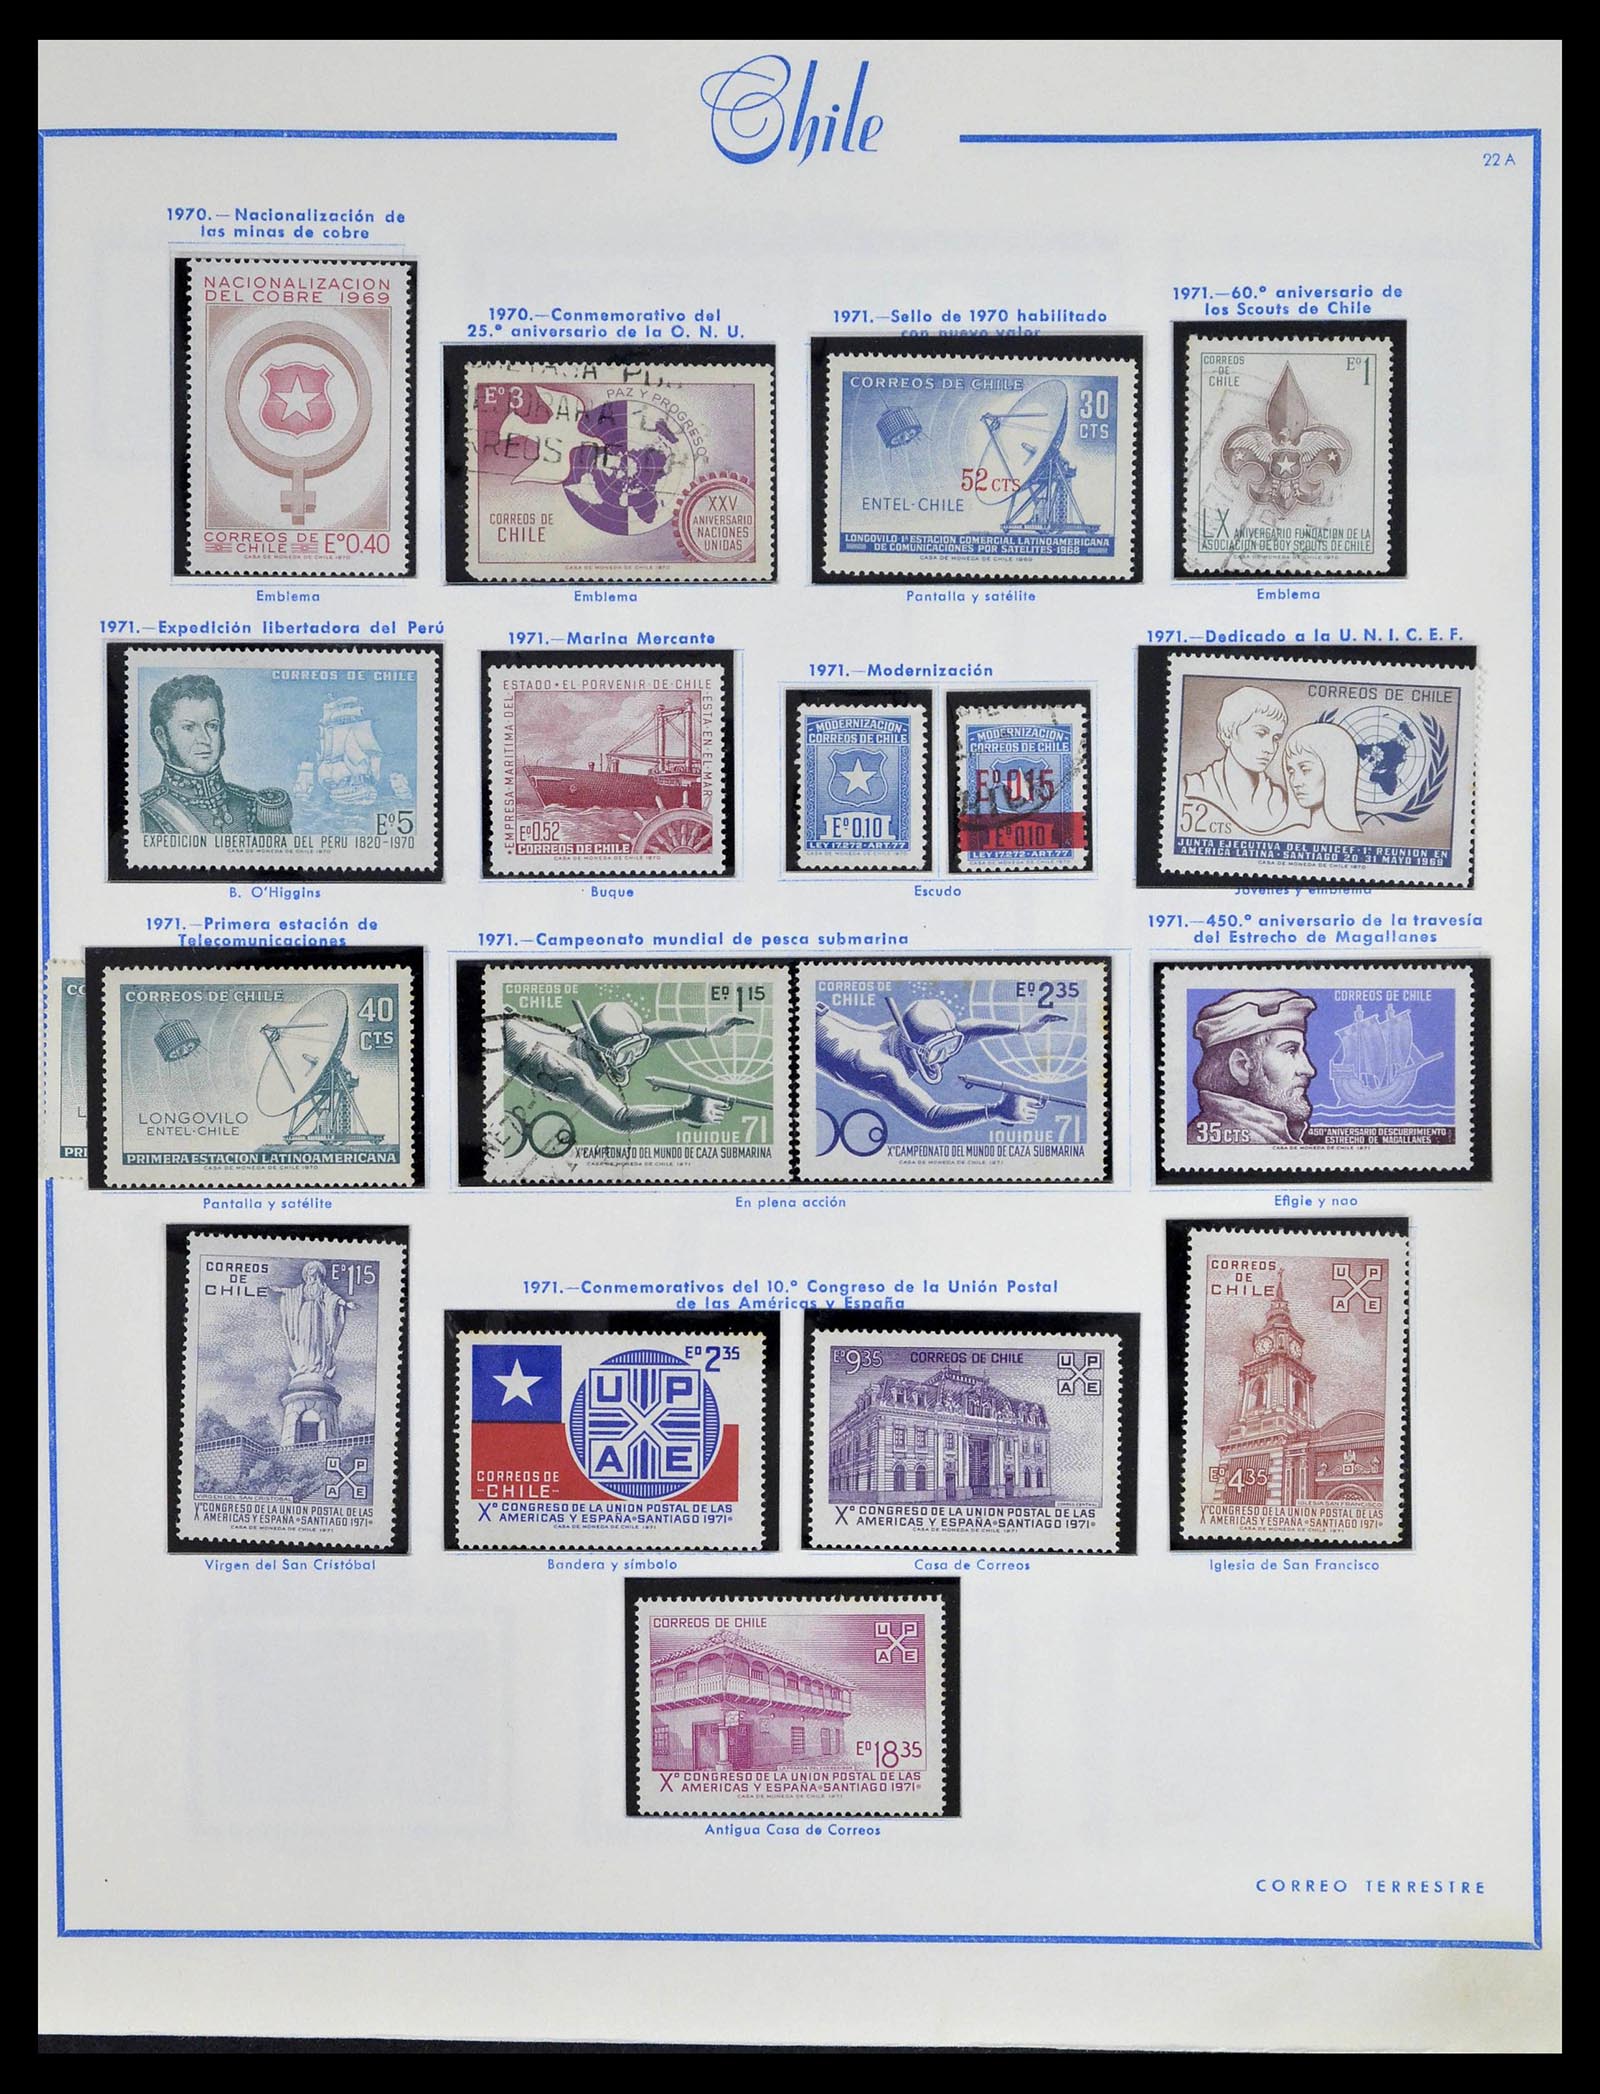 39213 0028 - Stamp collection 39213 Chile 1853-1970.